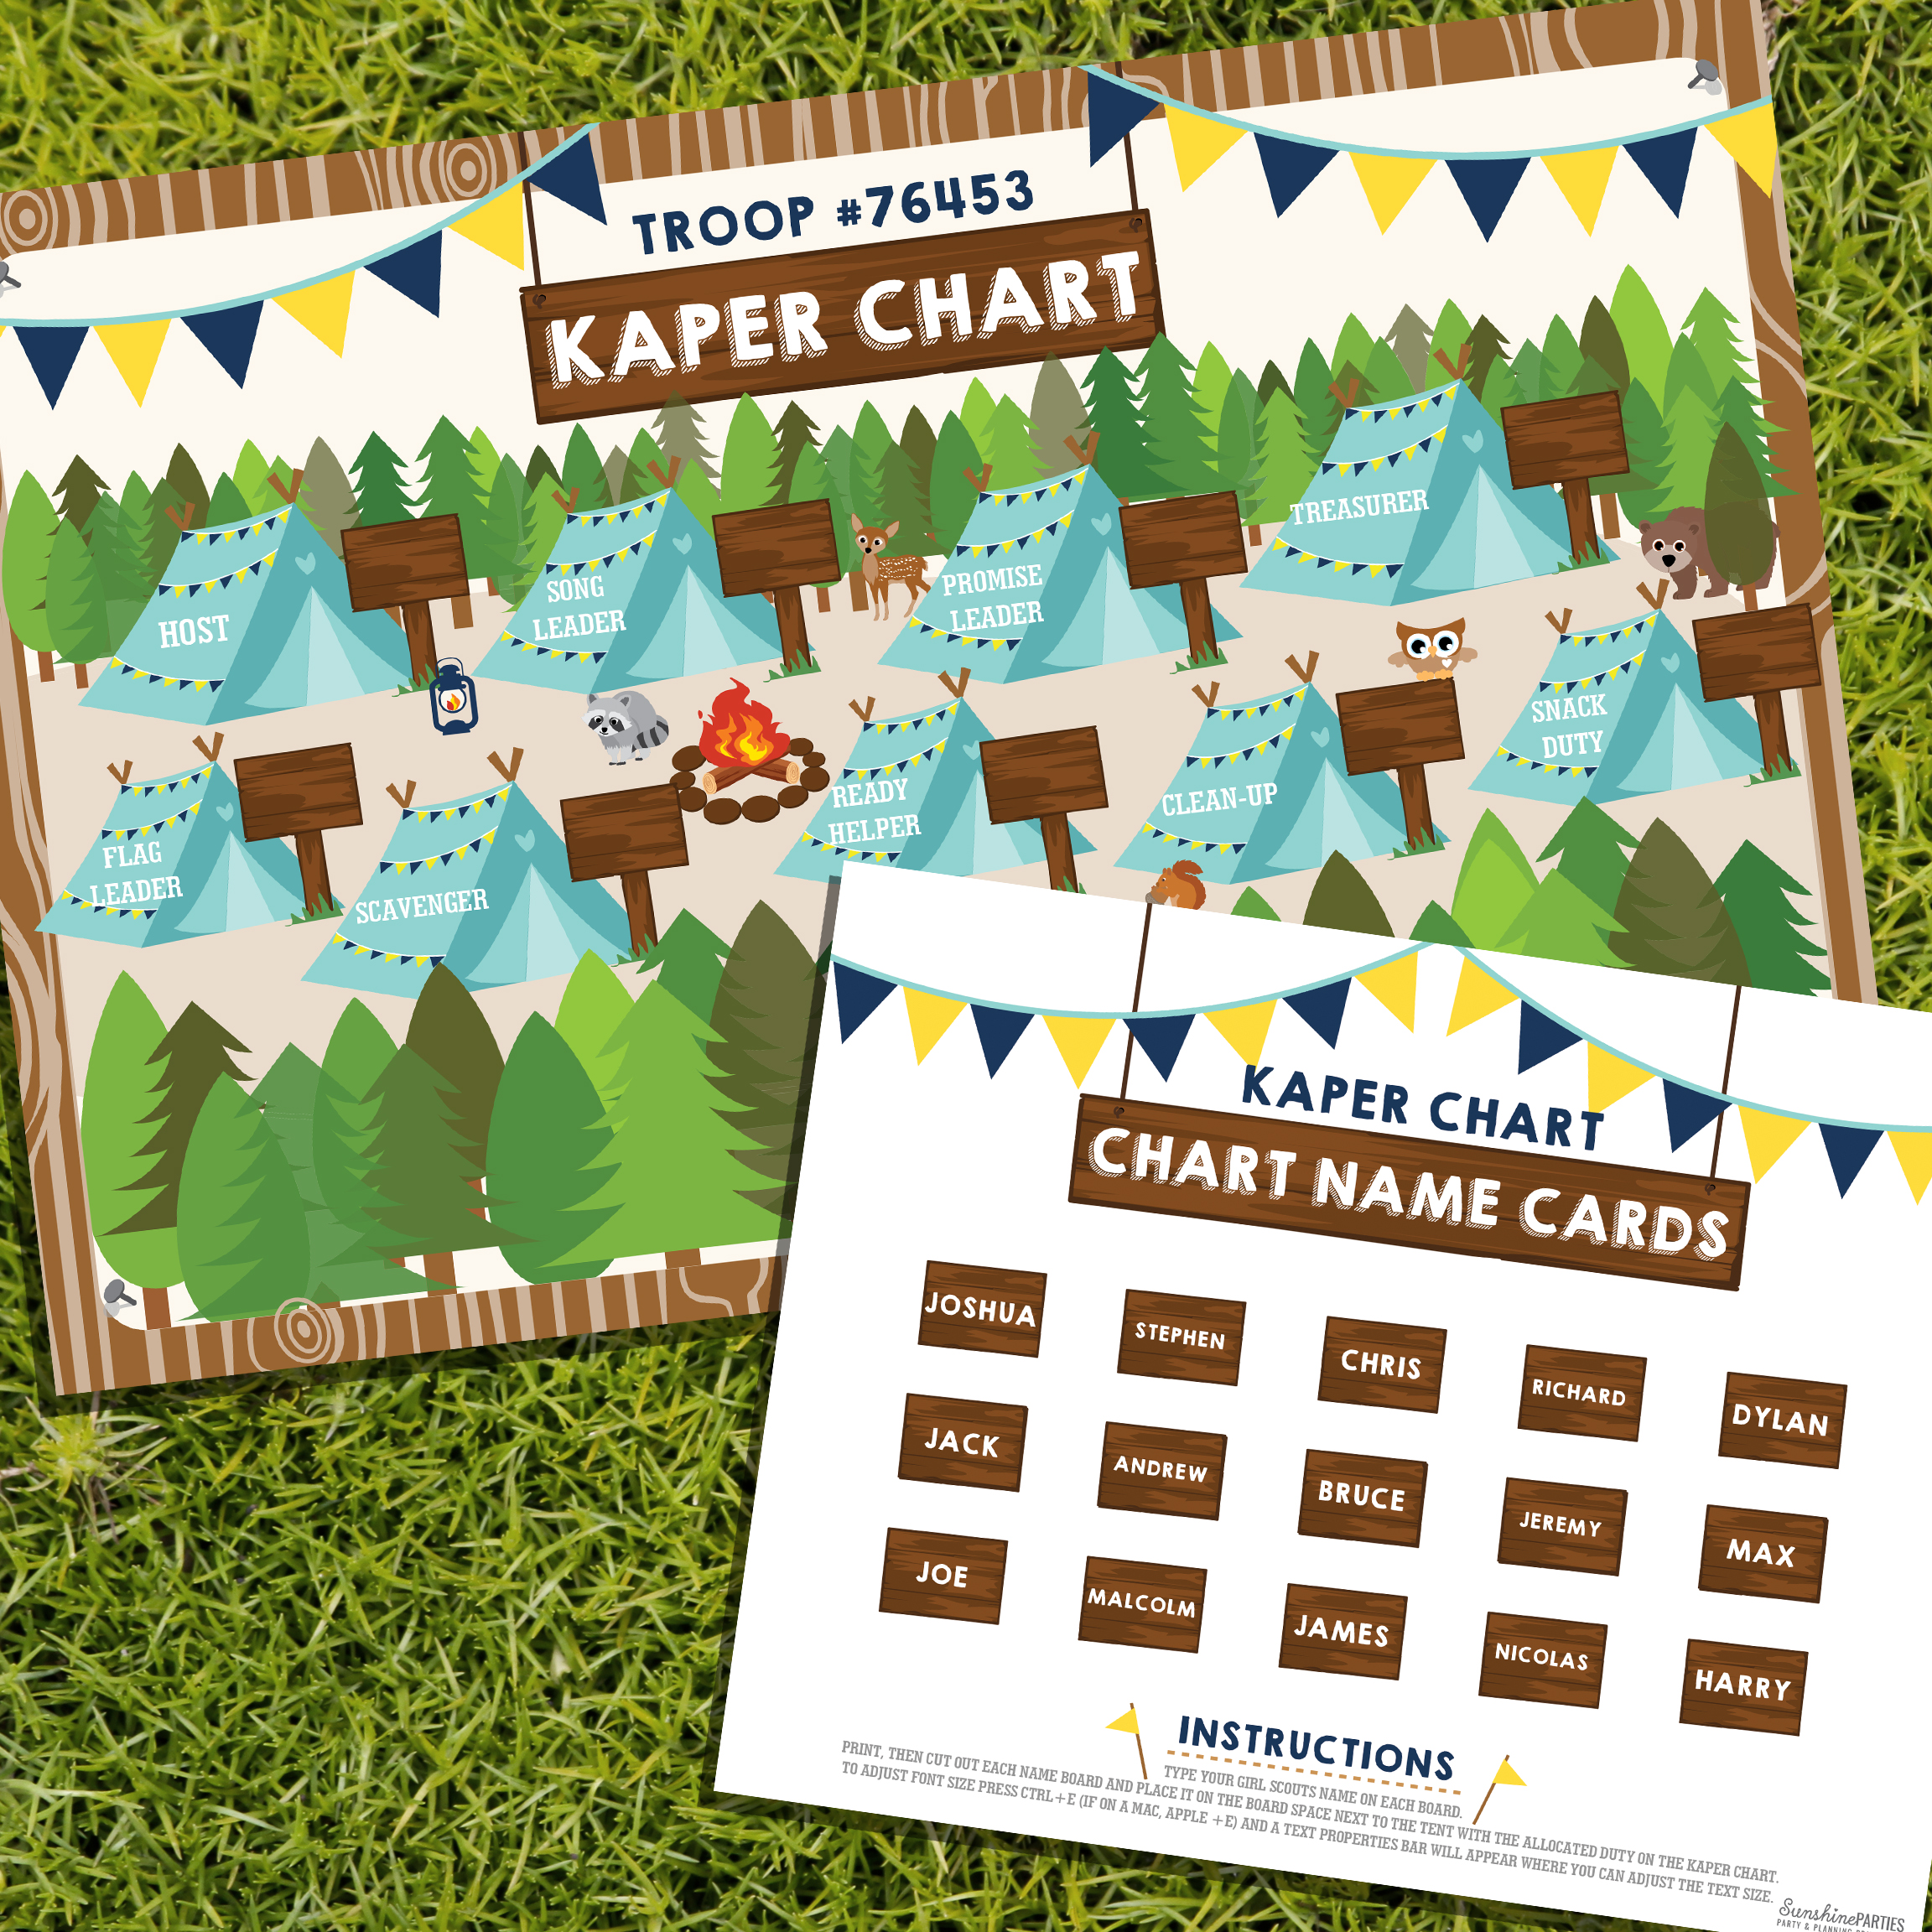 Get your boy scout or cubs kaper chart and name cards - editable and printable! 